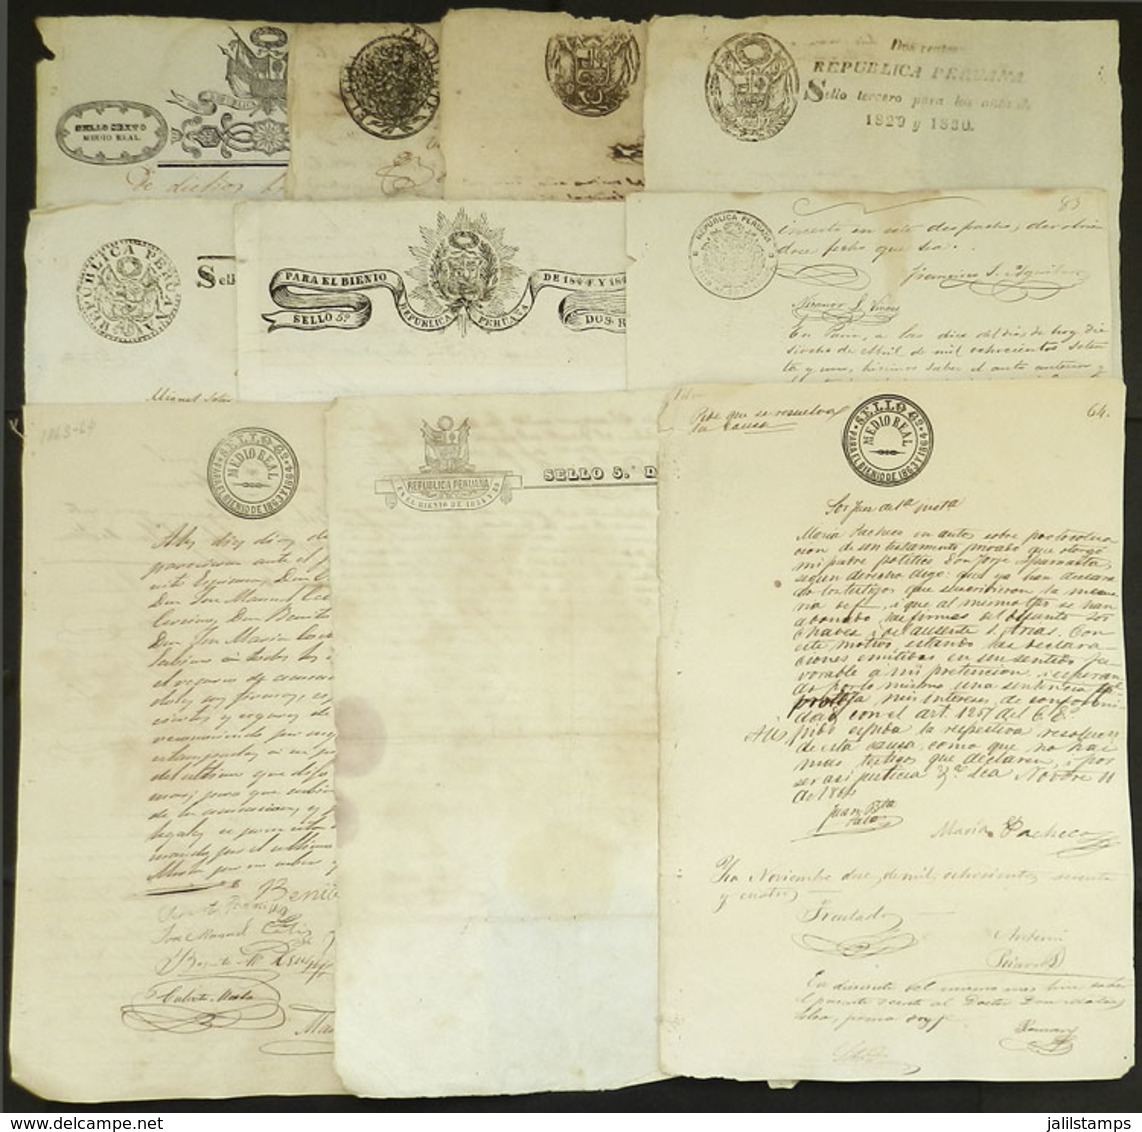 PERU: REVENUE-STAMPED PAPER: Approximately 100 Pages, From 1824 To 1900 (not Consecutive), With Some Duplication But Als - Perú